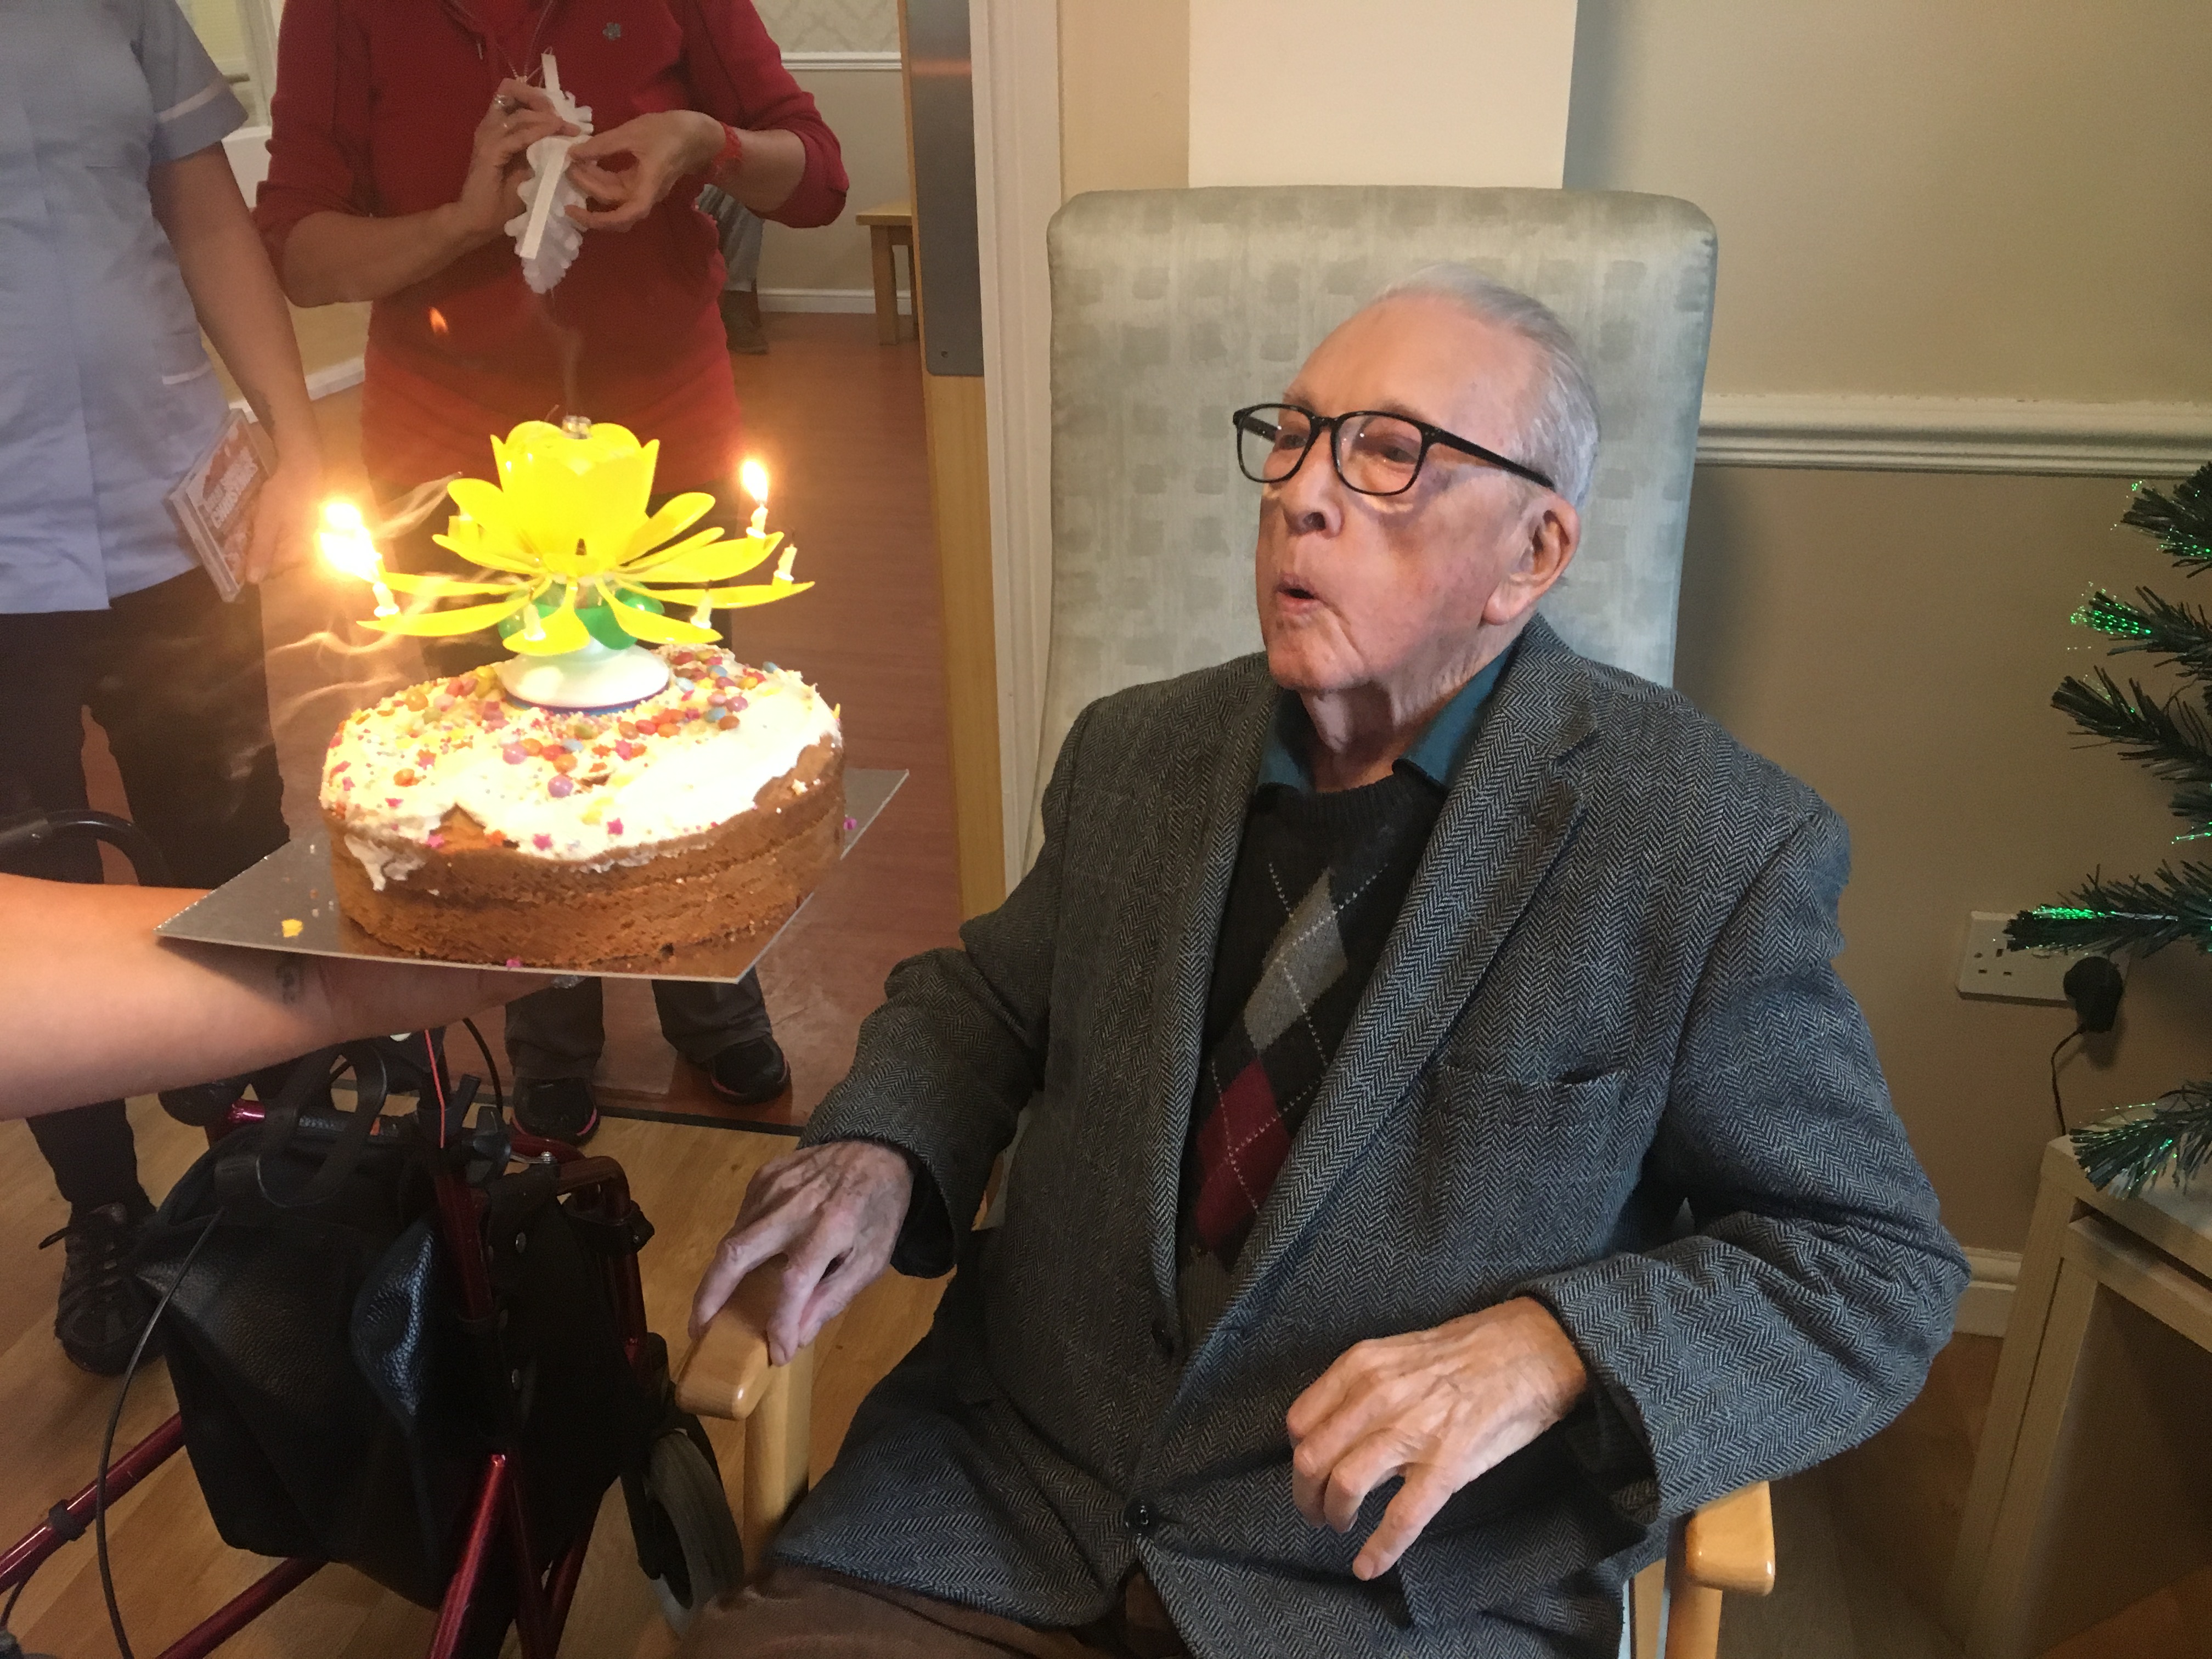 Special Birthday Celebrations at Four Seasons Care Centre: Key Healthcare is dedicated to caring for elderly residents in safe. We have multiple dementia care homes including our care home middlesbrough, our care home St. Helen and care home saltburn. We excel in monitoring and improving care levels.